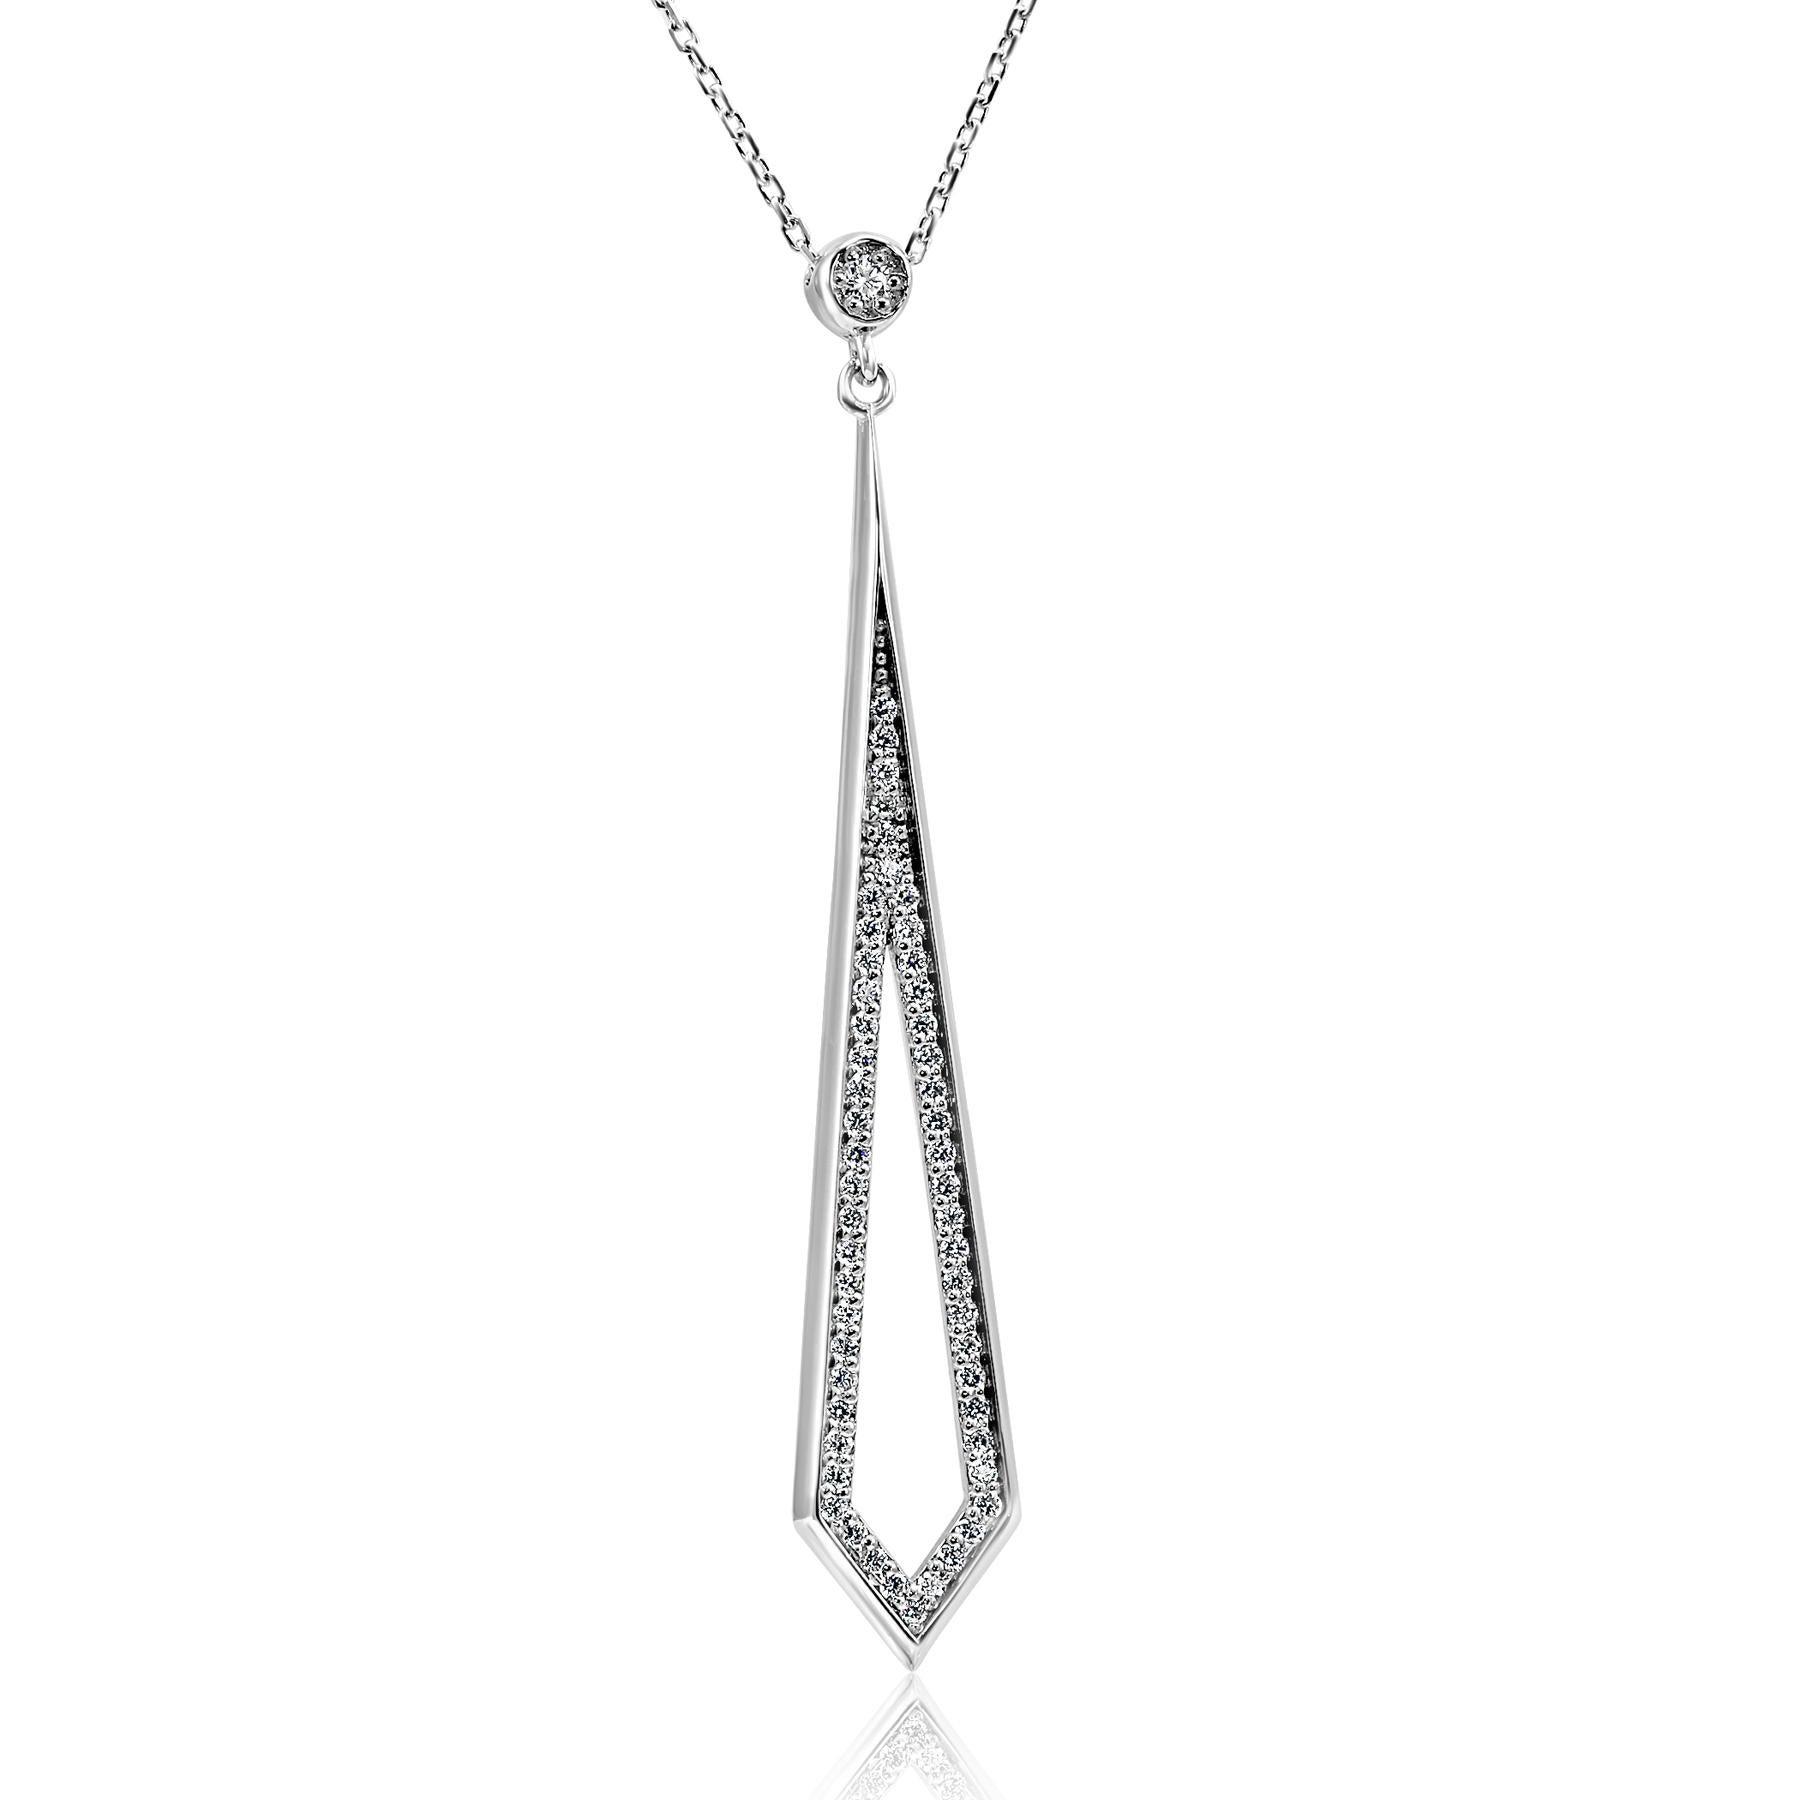 54 Colorless G-H Color SI Clarity Diamond Rounds 0.35 Carat set in beautiful 14K White Gold Stylish big look drop Pendant Chain necklace with lobster lock, perfect for all occasions and every day wear. 
Total Diamond Weight 0.35 Carat

MADE IN